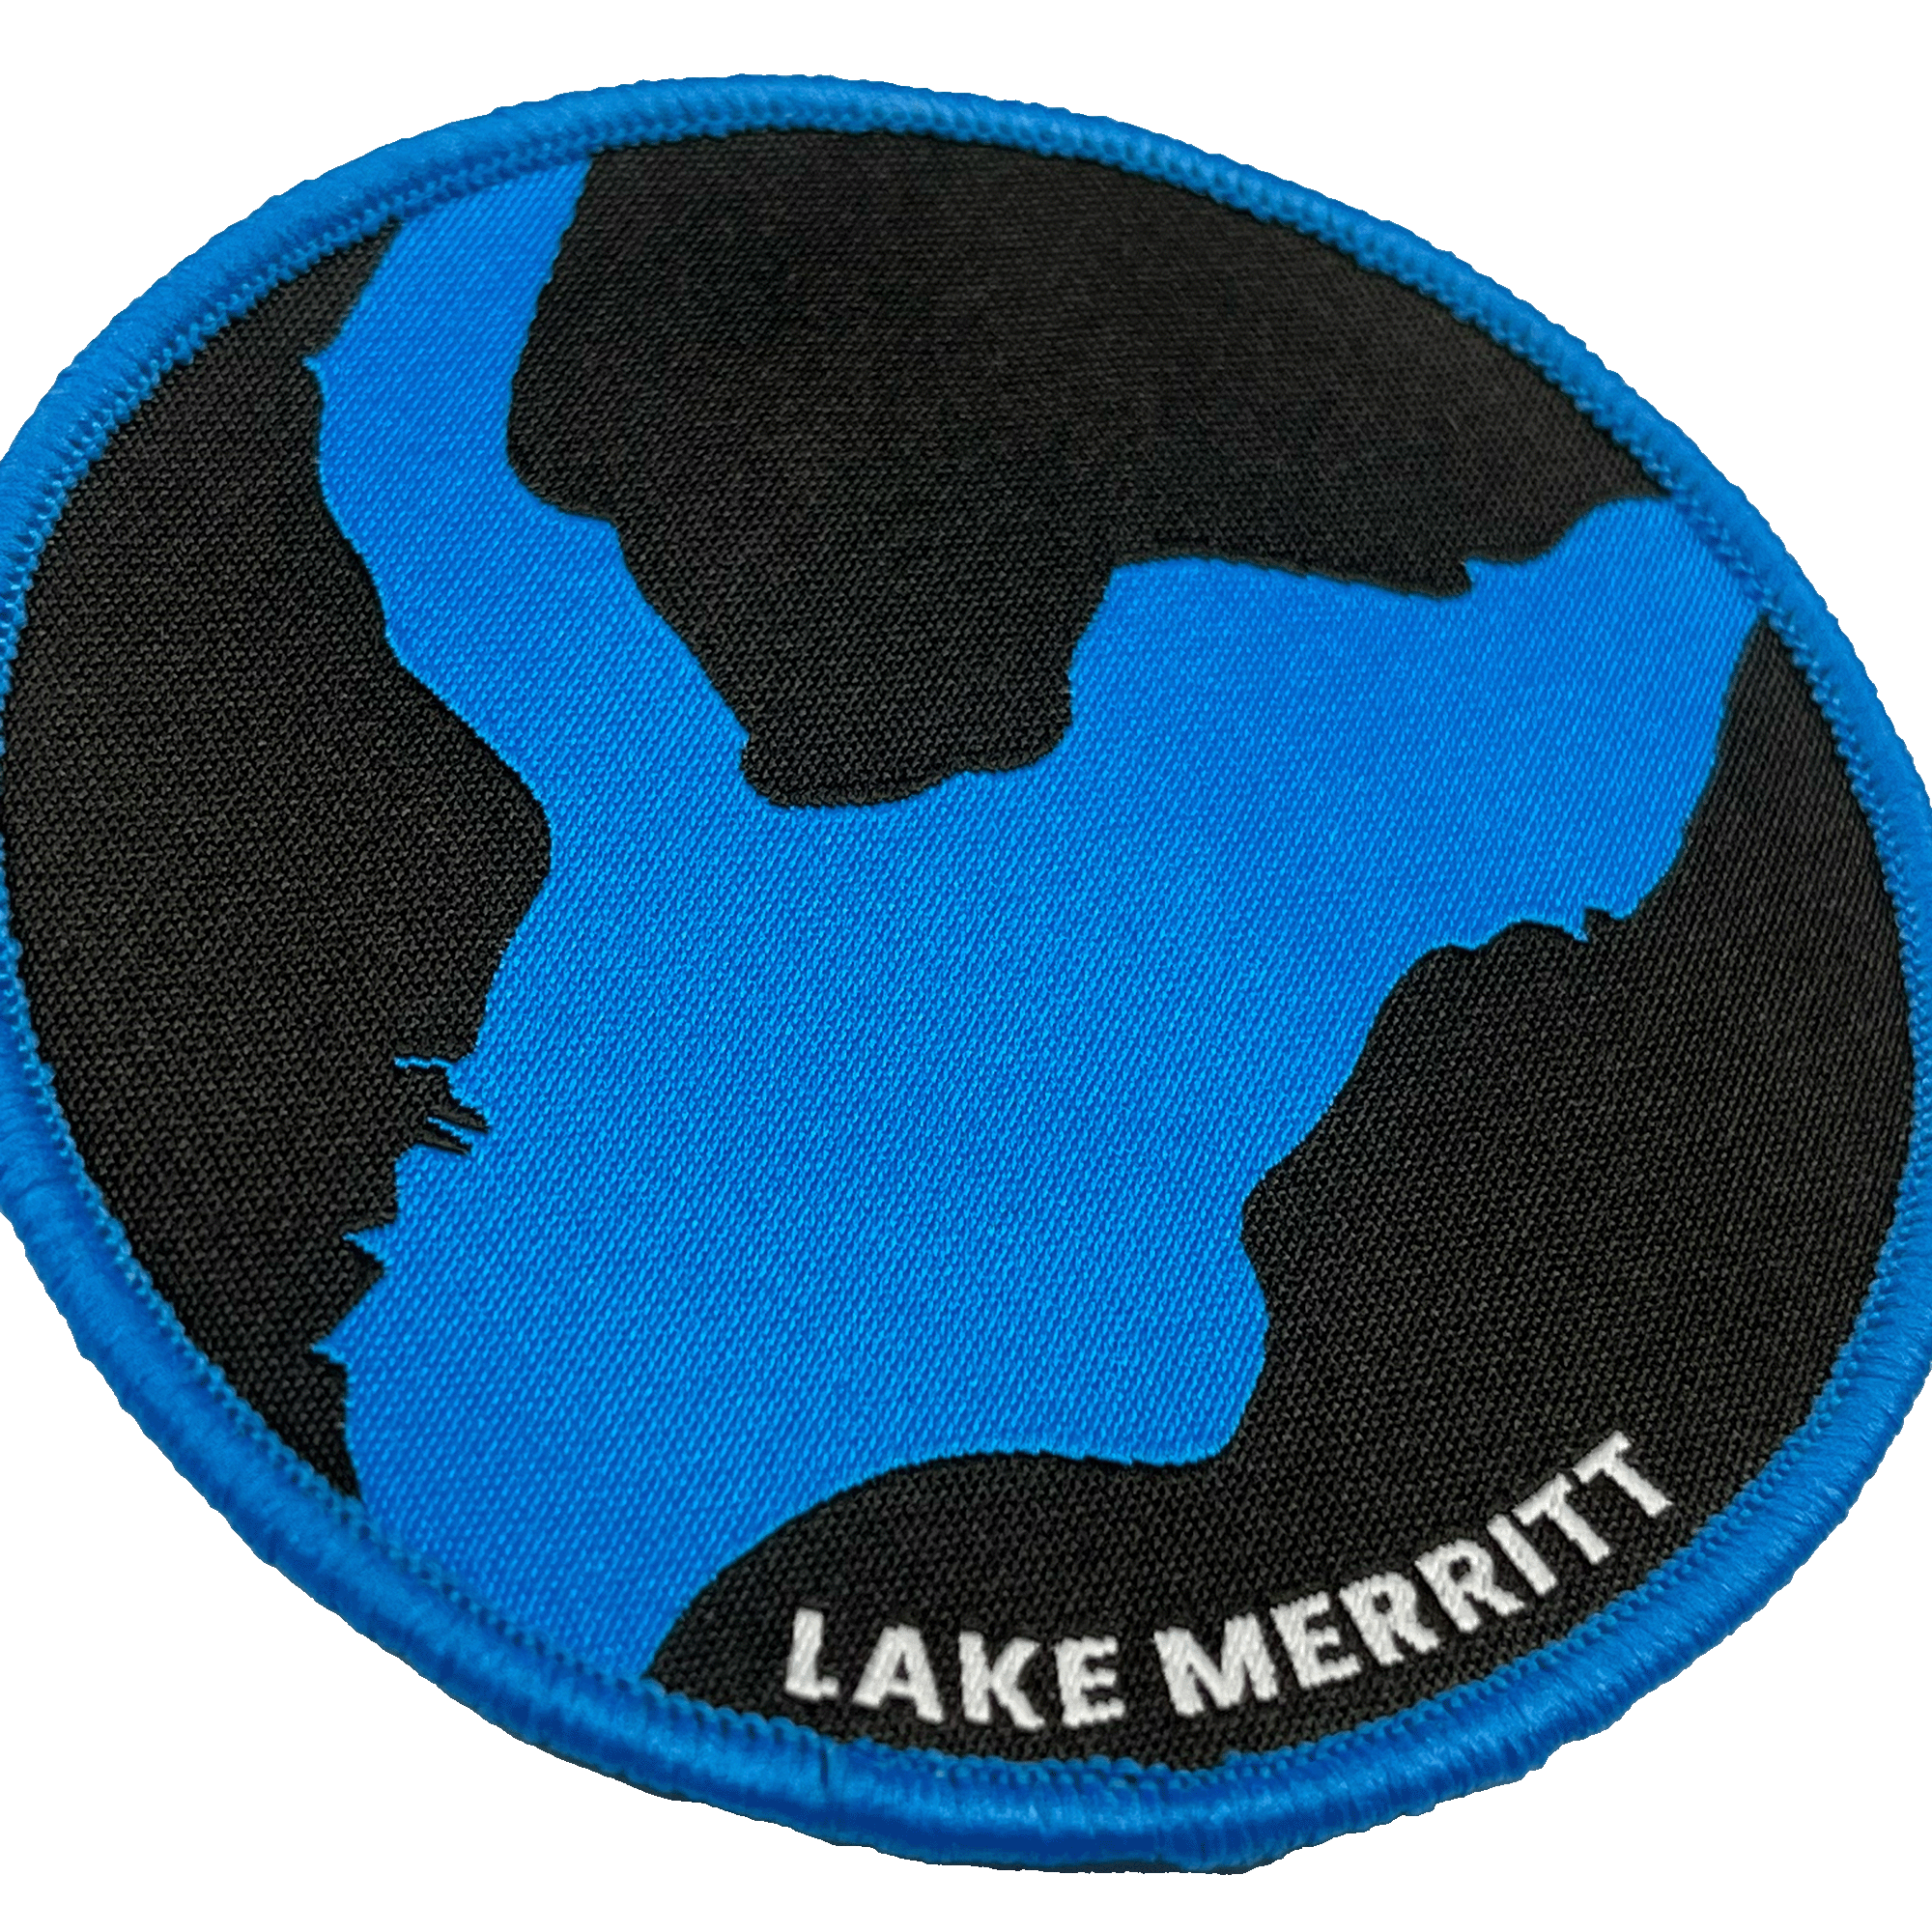 Close-up of black woven iron-on patch with a blue outline of Oakland's Lake Merritt & Lake Merritt wordmark.